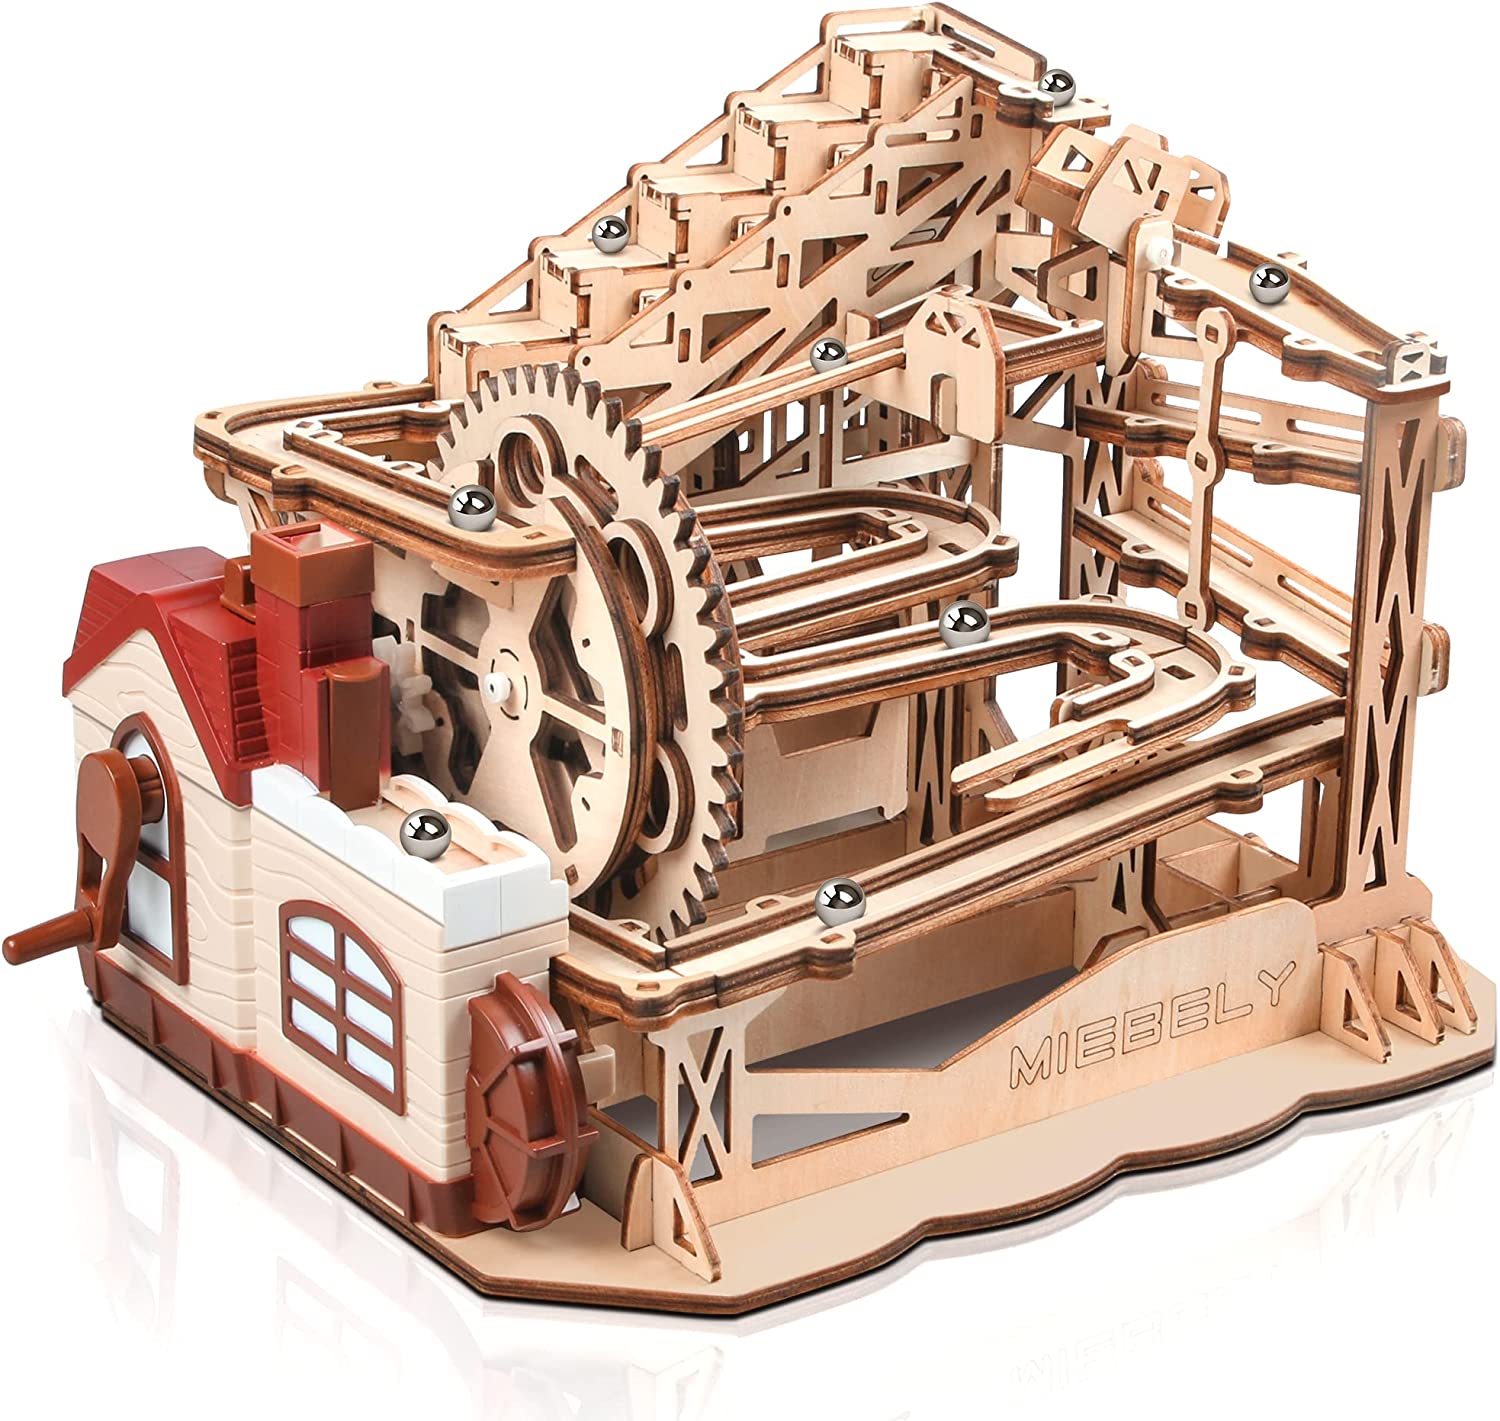 MIEBELY Electrical 3D Wooden Puzzle Craft Toys DIY Marble Run Model Bu